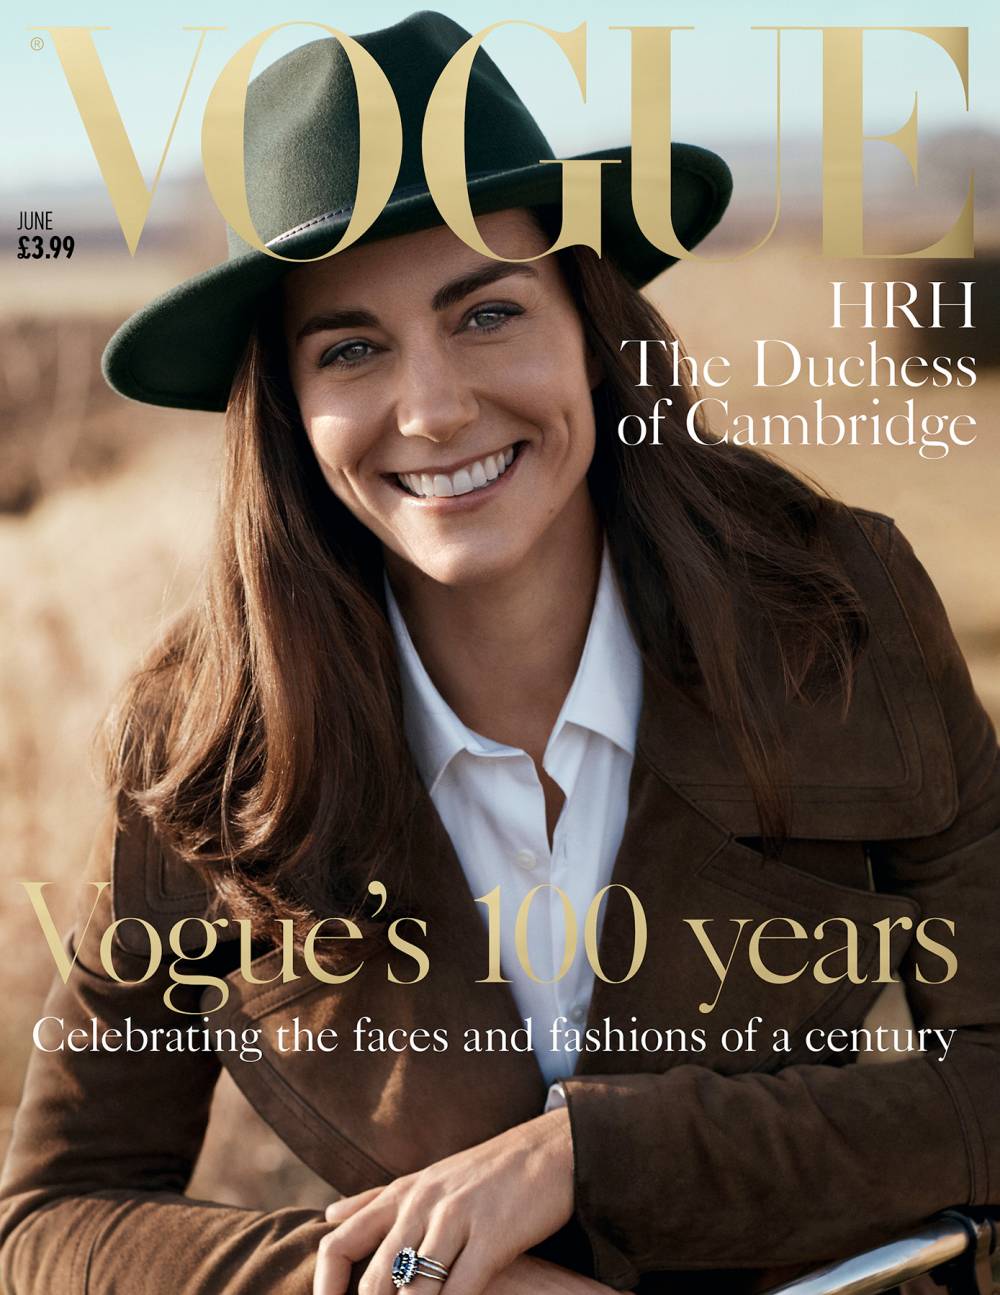 Kate Middleton on the cover of British Vogue